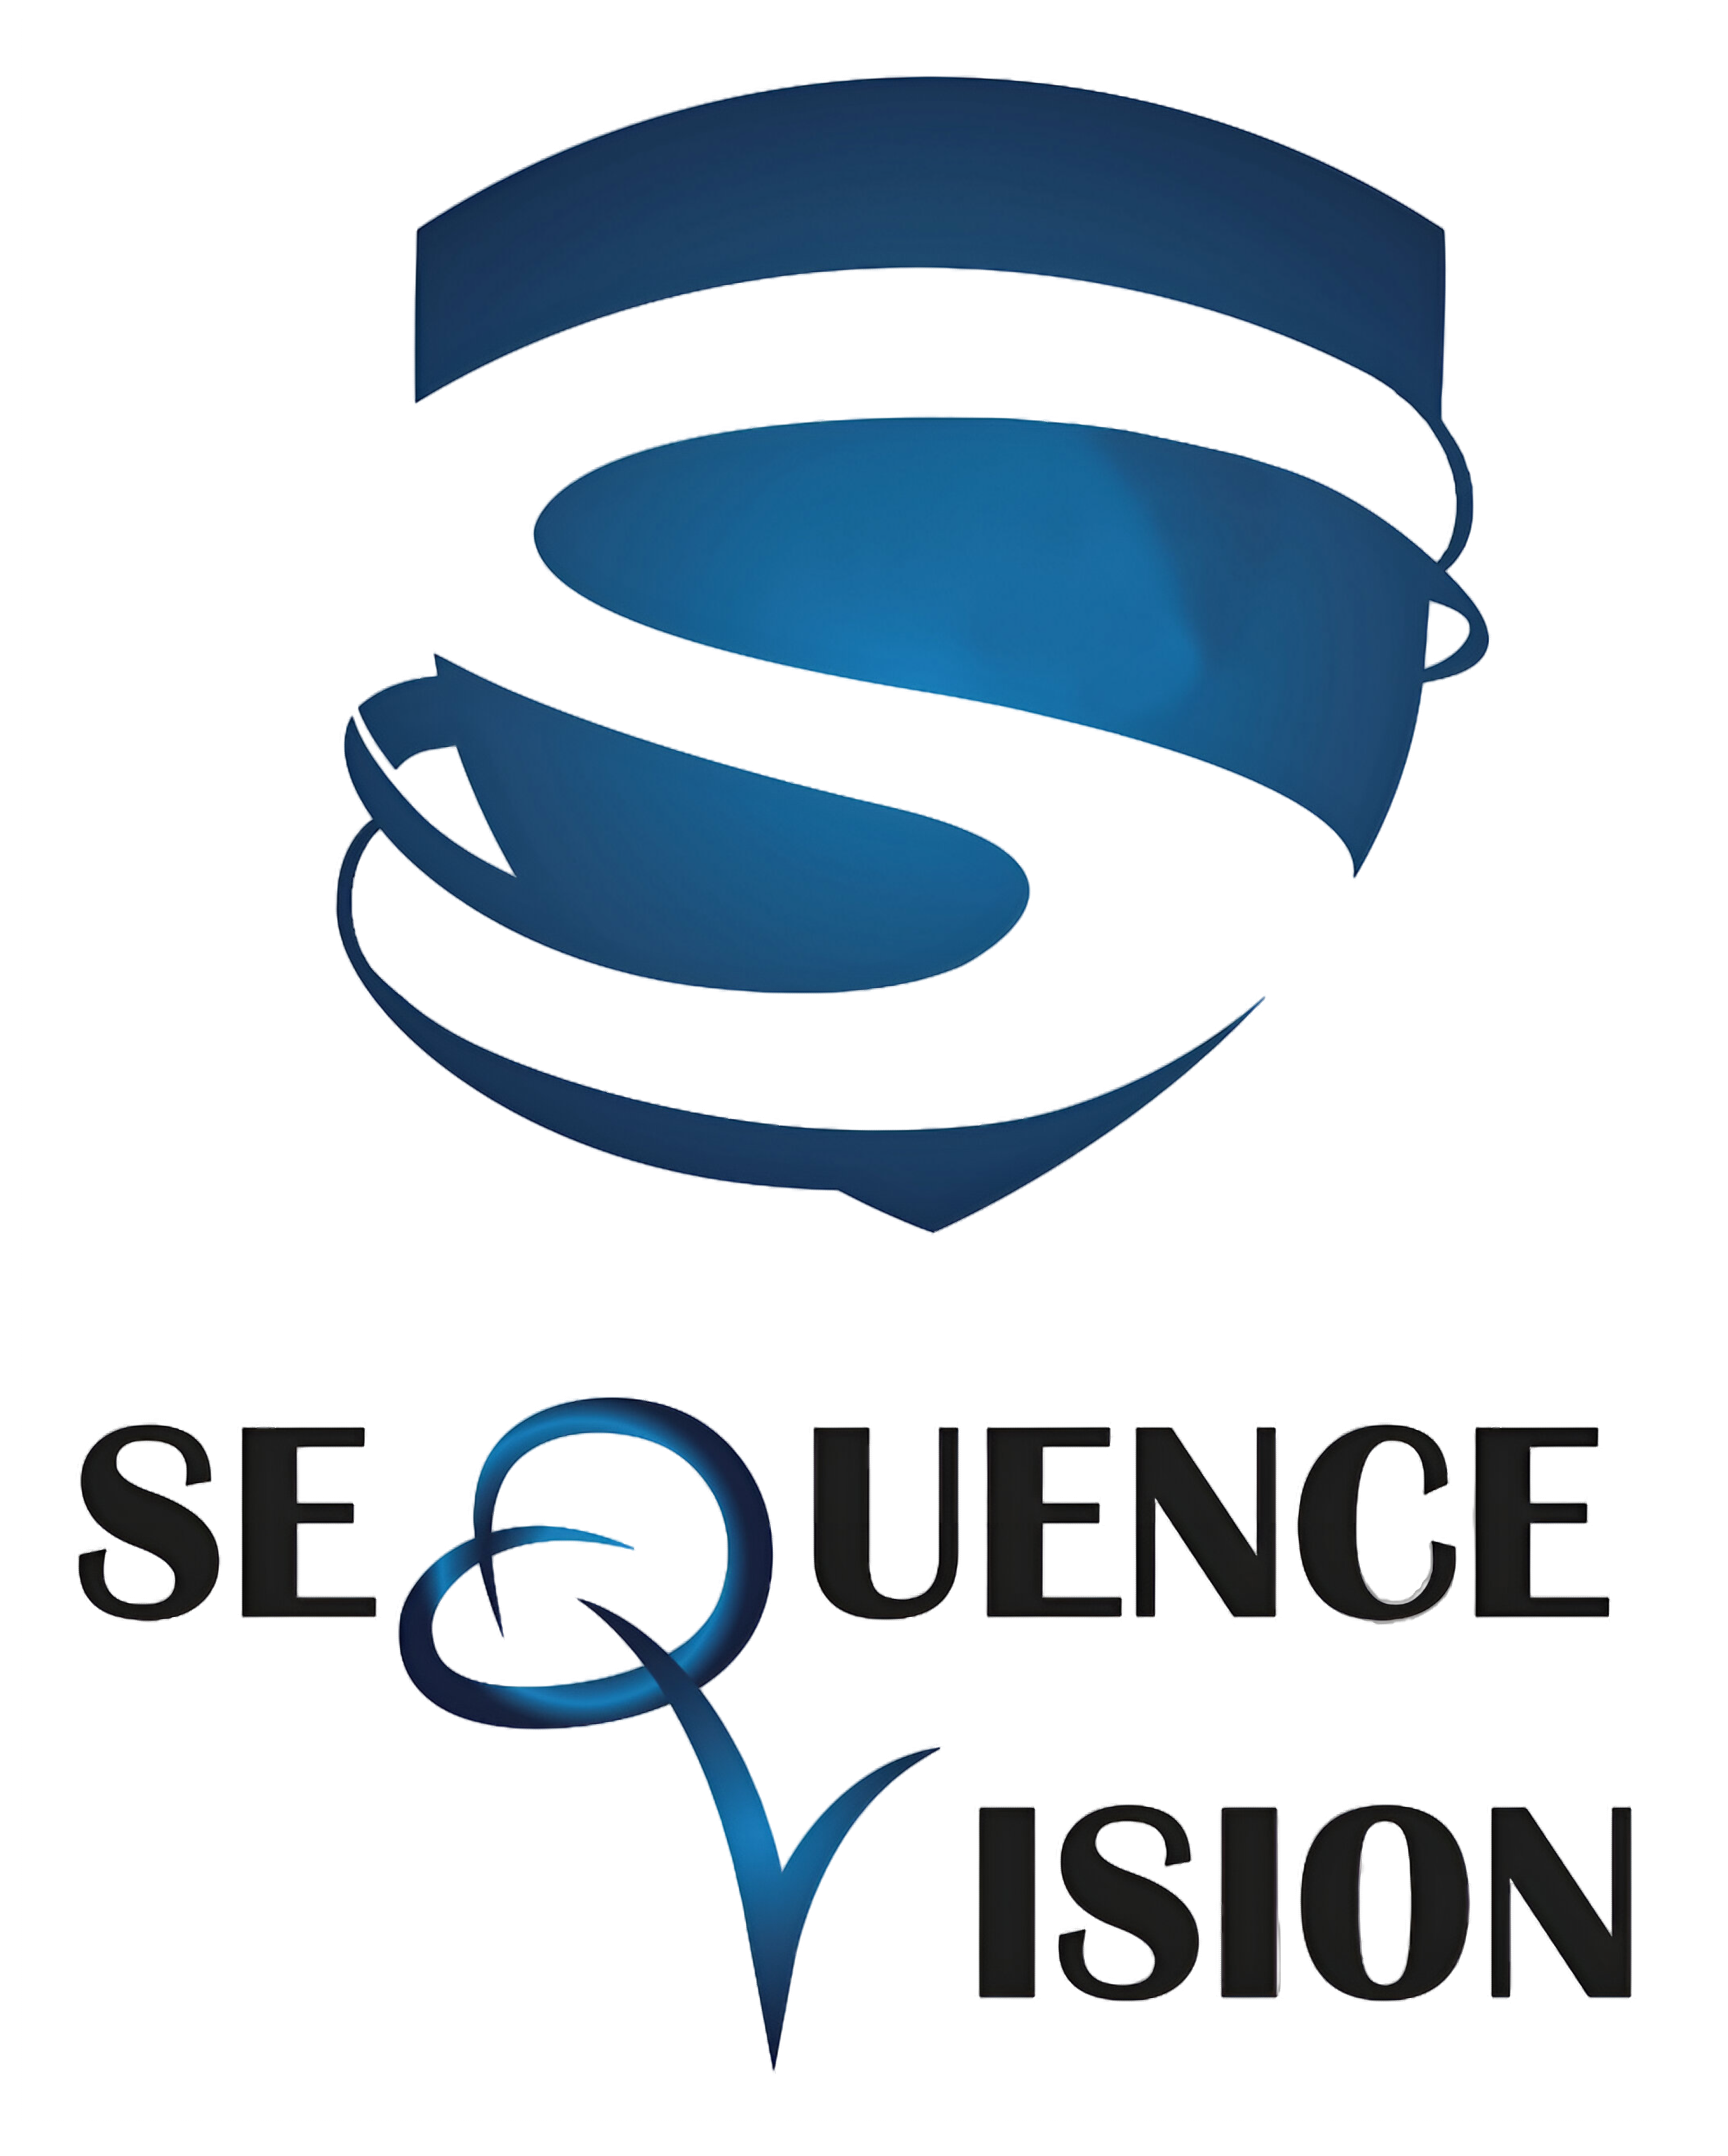 Sequence Vision